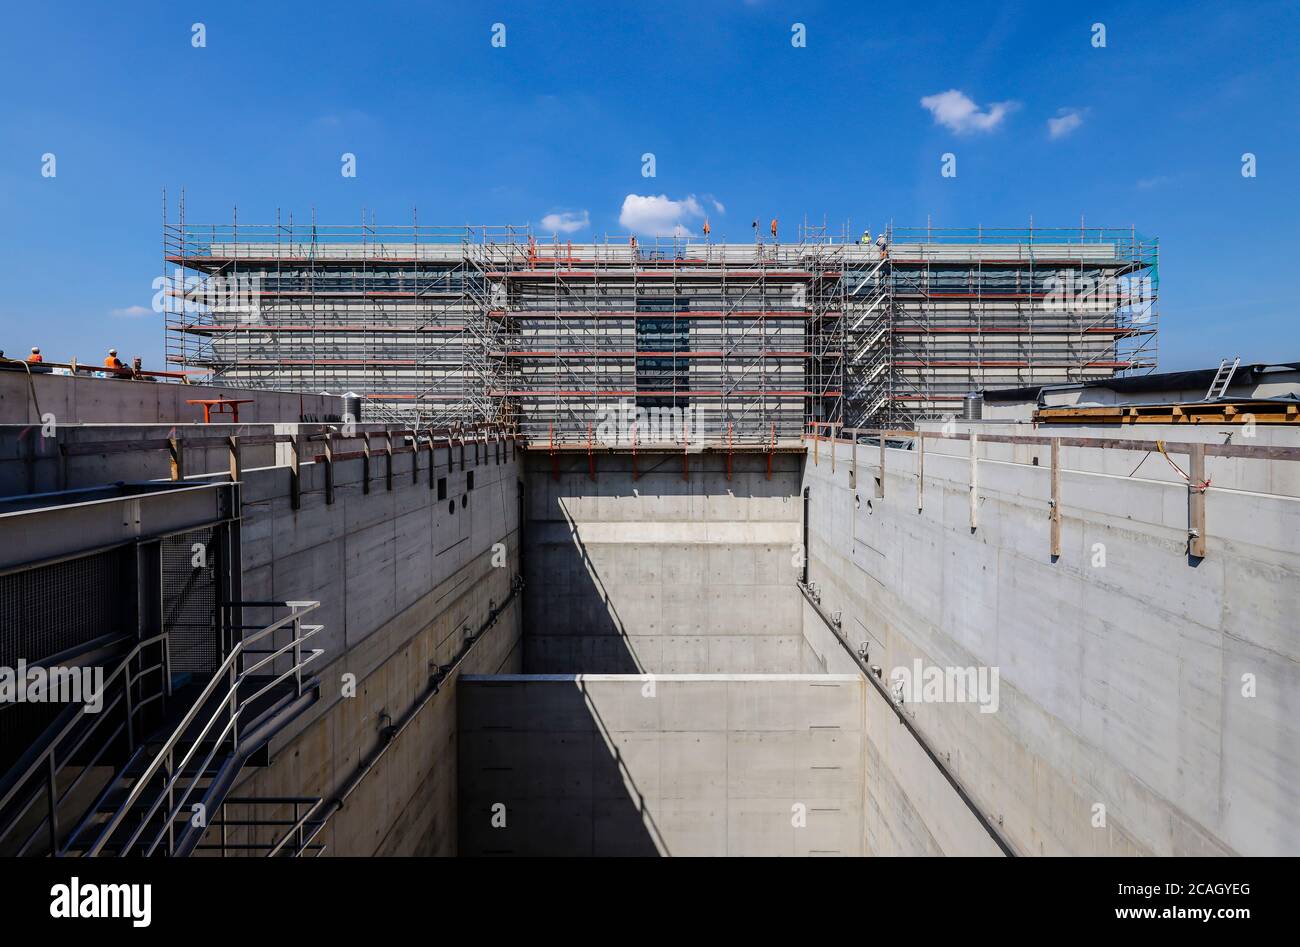 23.06.2020, Oberhausen, North Rhine-Westphalia, Germany - Emscher conversion, new construction of the Emscher AKE sewer, here the new pumping station Stock Photo